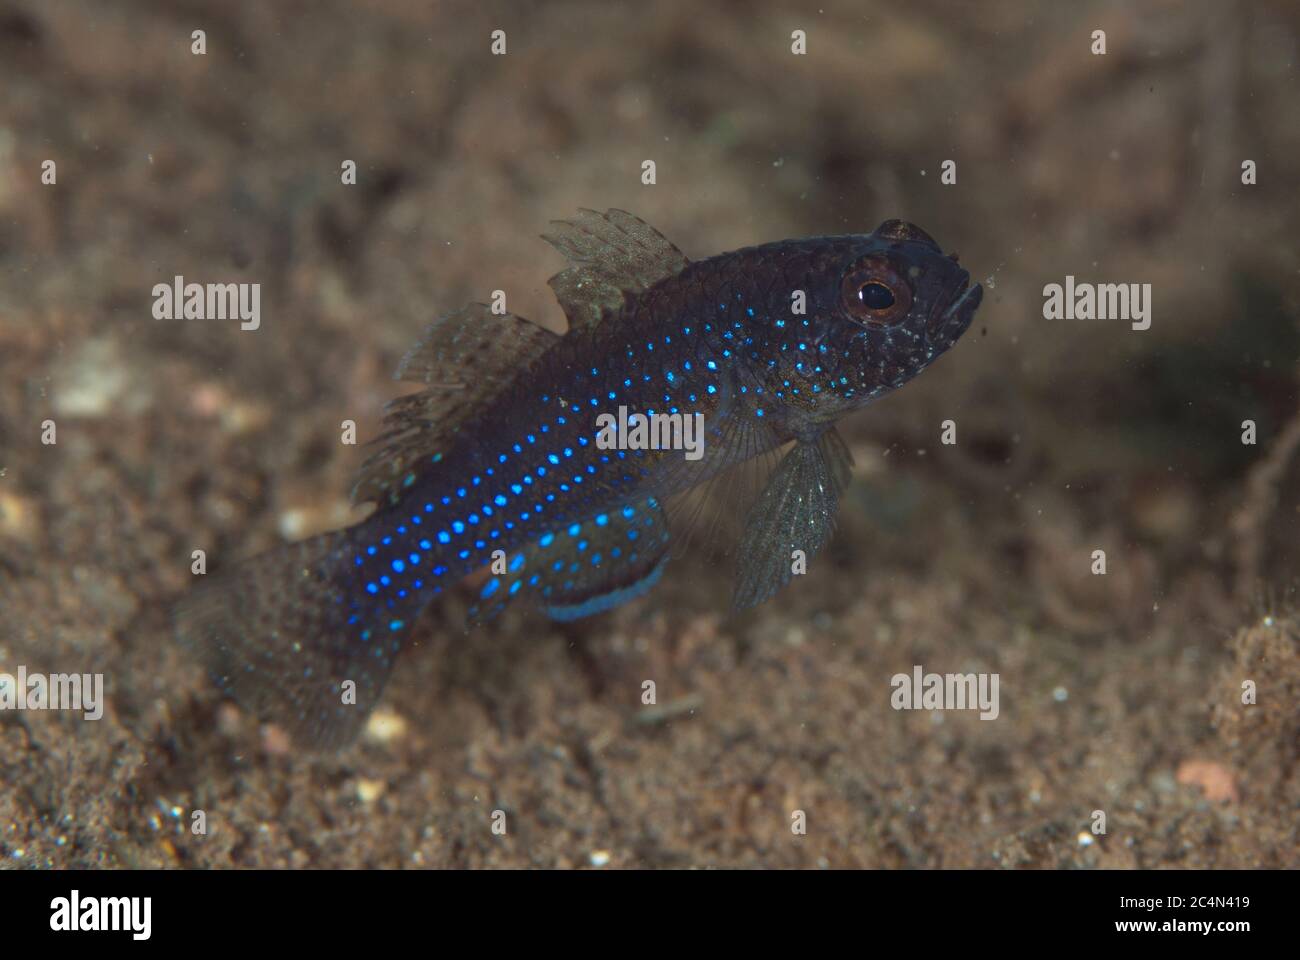 Blackfoot Goby, Asterropteryx atripes, on sand, Wudong Bay, Maumere, Flores, Indonesia Stock Photo